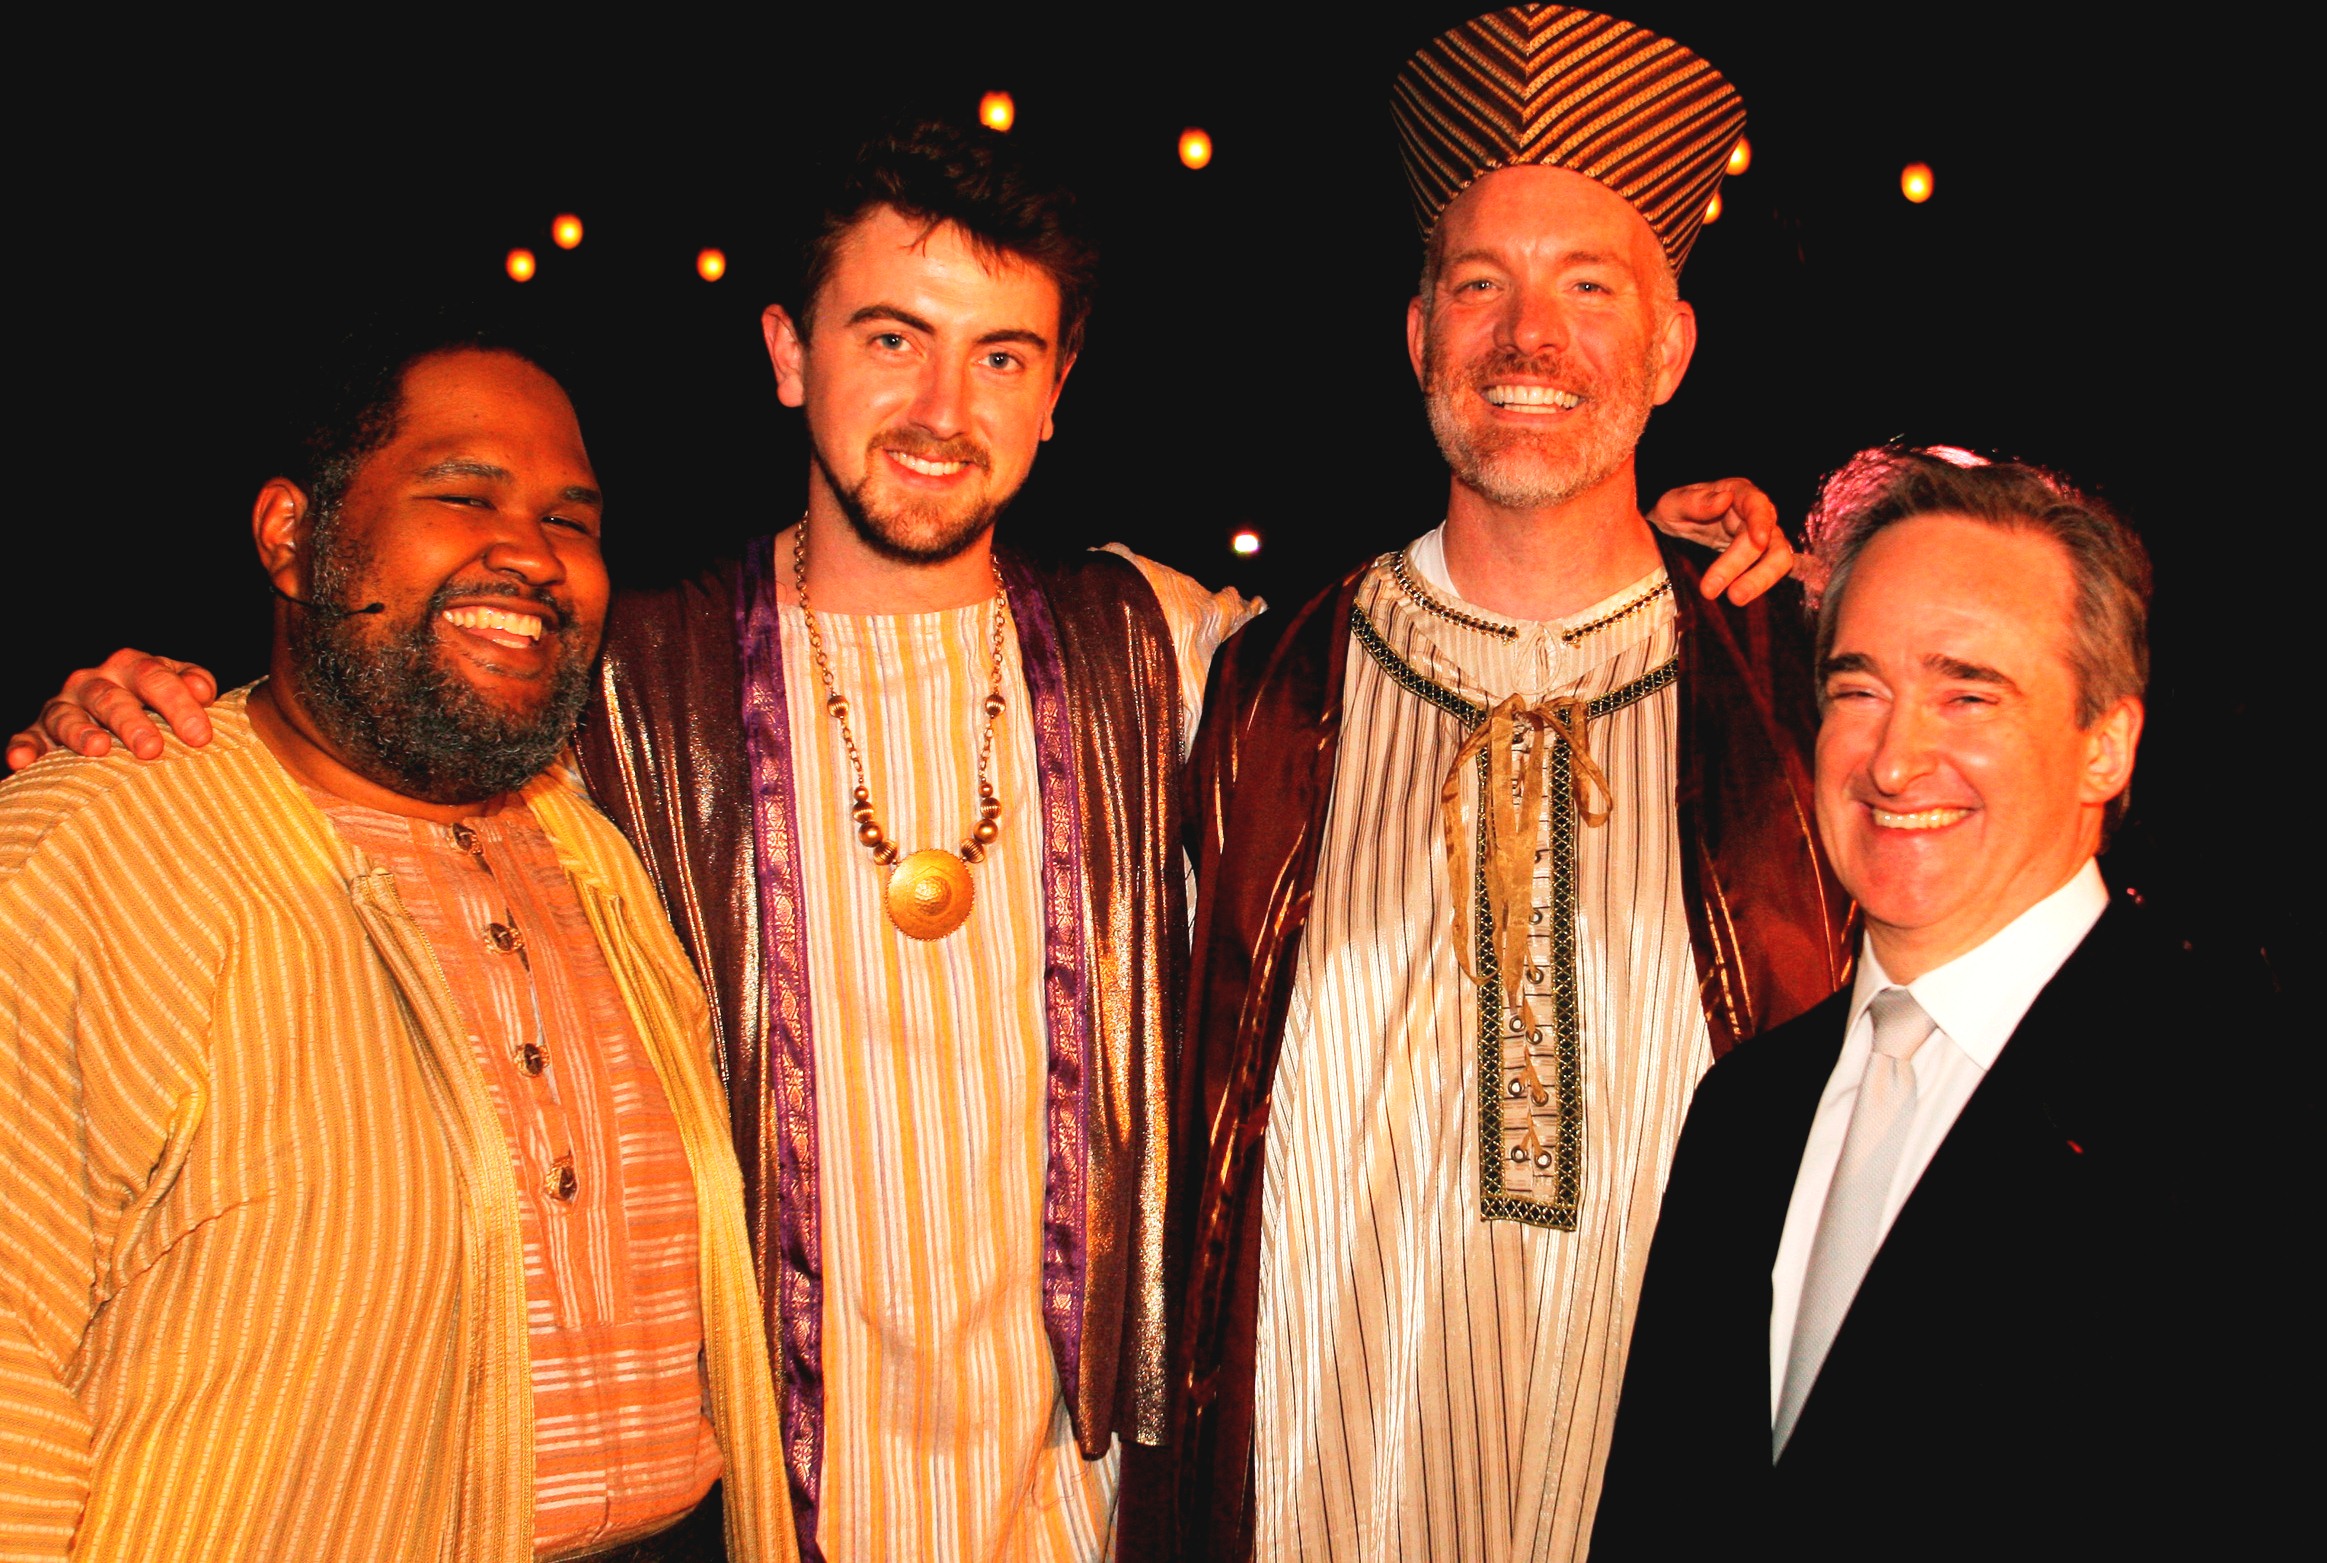 Pictured from left to right are tenors Ashley Fataaiola ‘06, Ben Bliss ’09 and Robert MacNeil ’93 with LA Opera maestro James Conlon, who holds an honorary Chapman University doctorate.